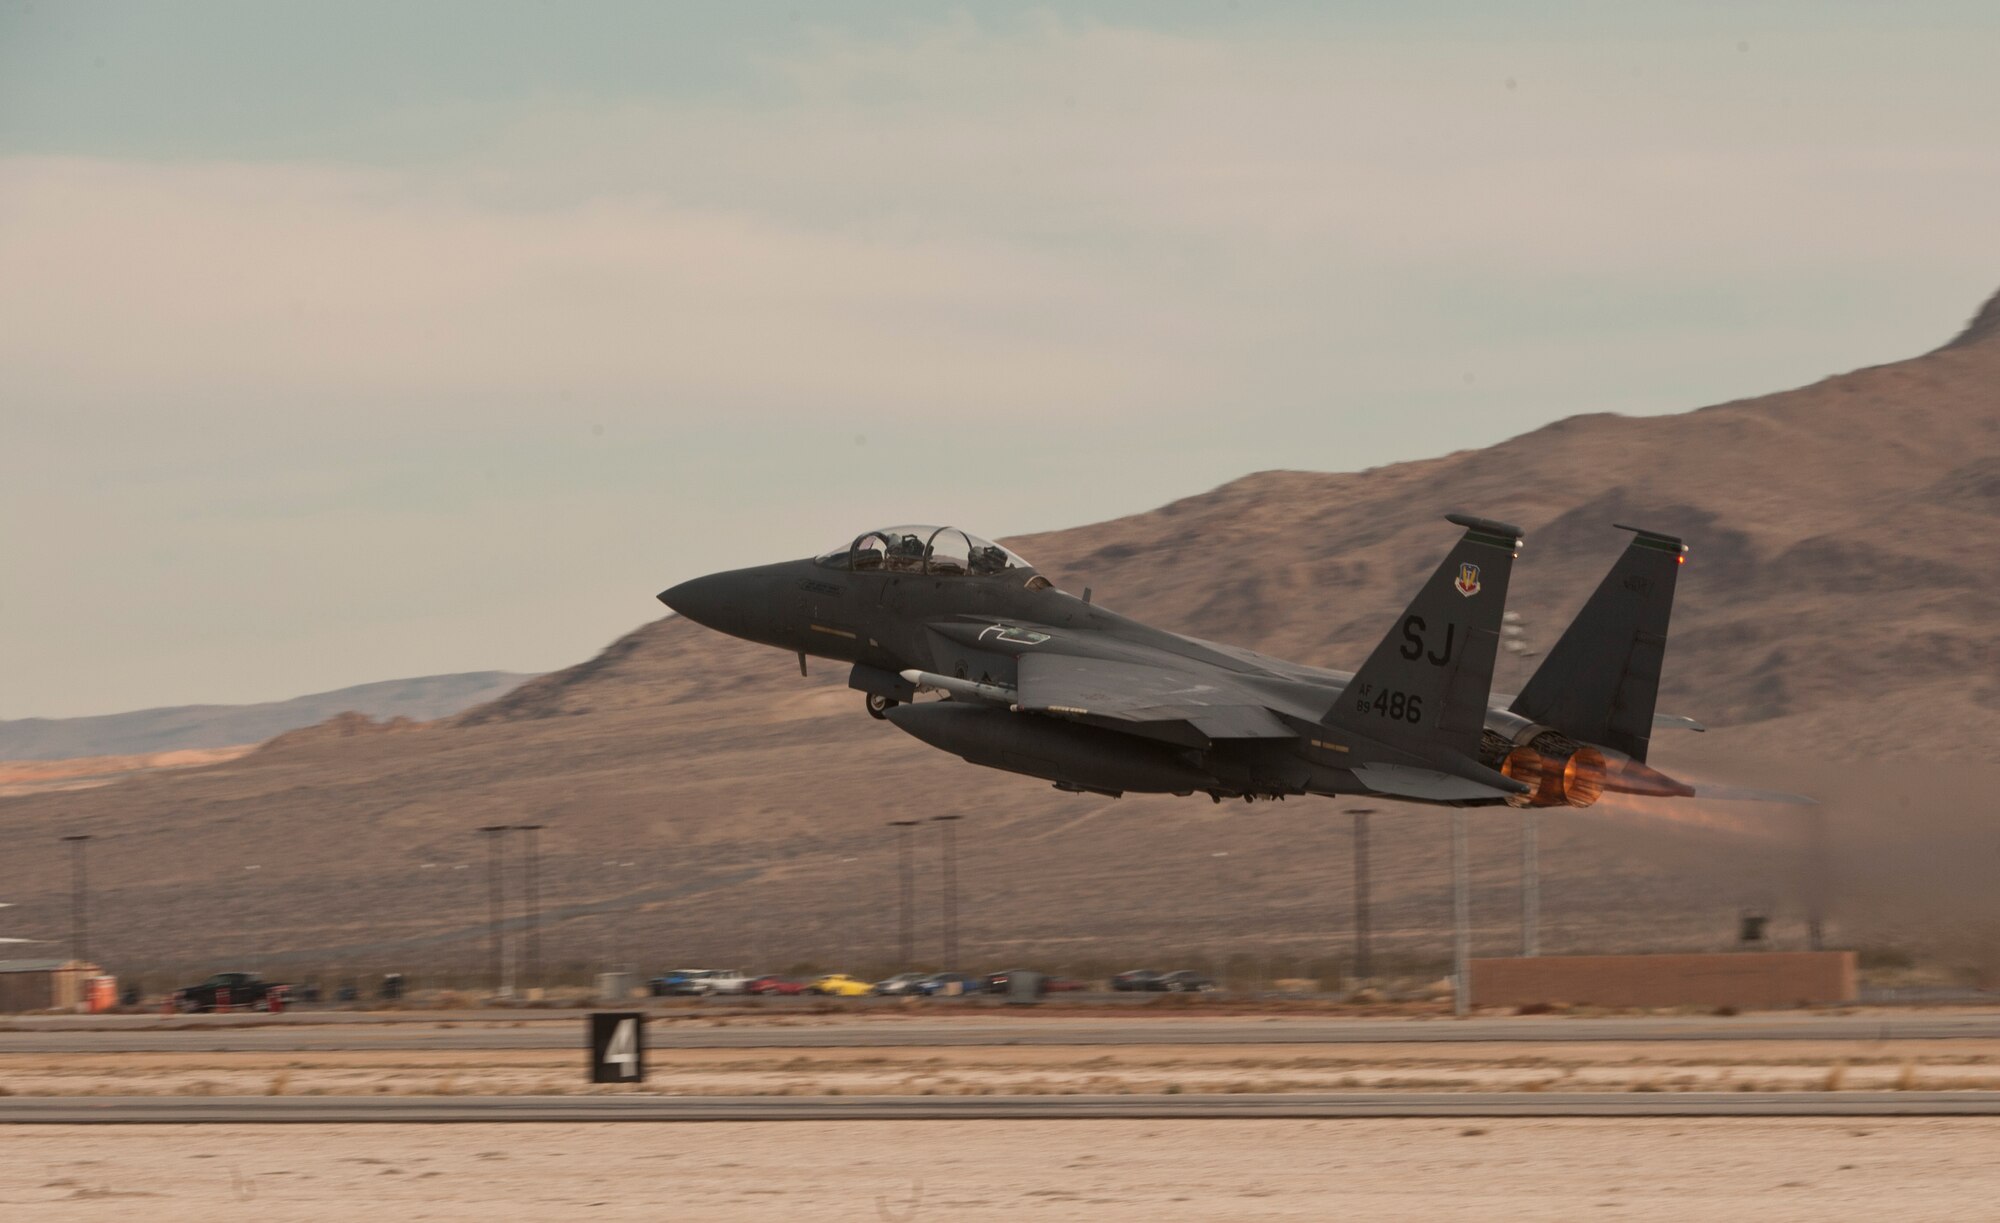 An F-15E Strike Eagle assigned to the 335th Fighter Squadron, Seymour Johnson Air Force Base, N.C., takes off from Nellis Air Force Base, Nev., to take part in a Red Flag 15-1 training sortie over the Nevada Test and Training Range Feb. 4, 2015. Various units from around the Air Force, joint branches and coalition partners converge on Nellis three to four times a year to take part in the exercise, which simulates large-scale live, virtual and constructive warfare. (U.S. Air Force photo by Airman 1st Class Joshua Kleinholz) 